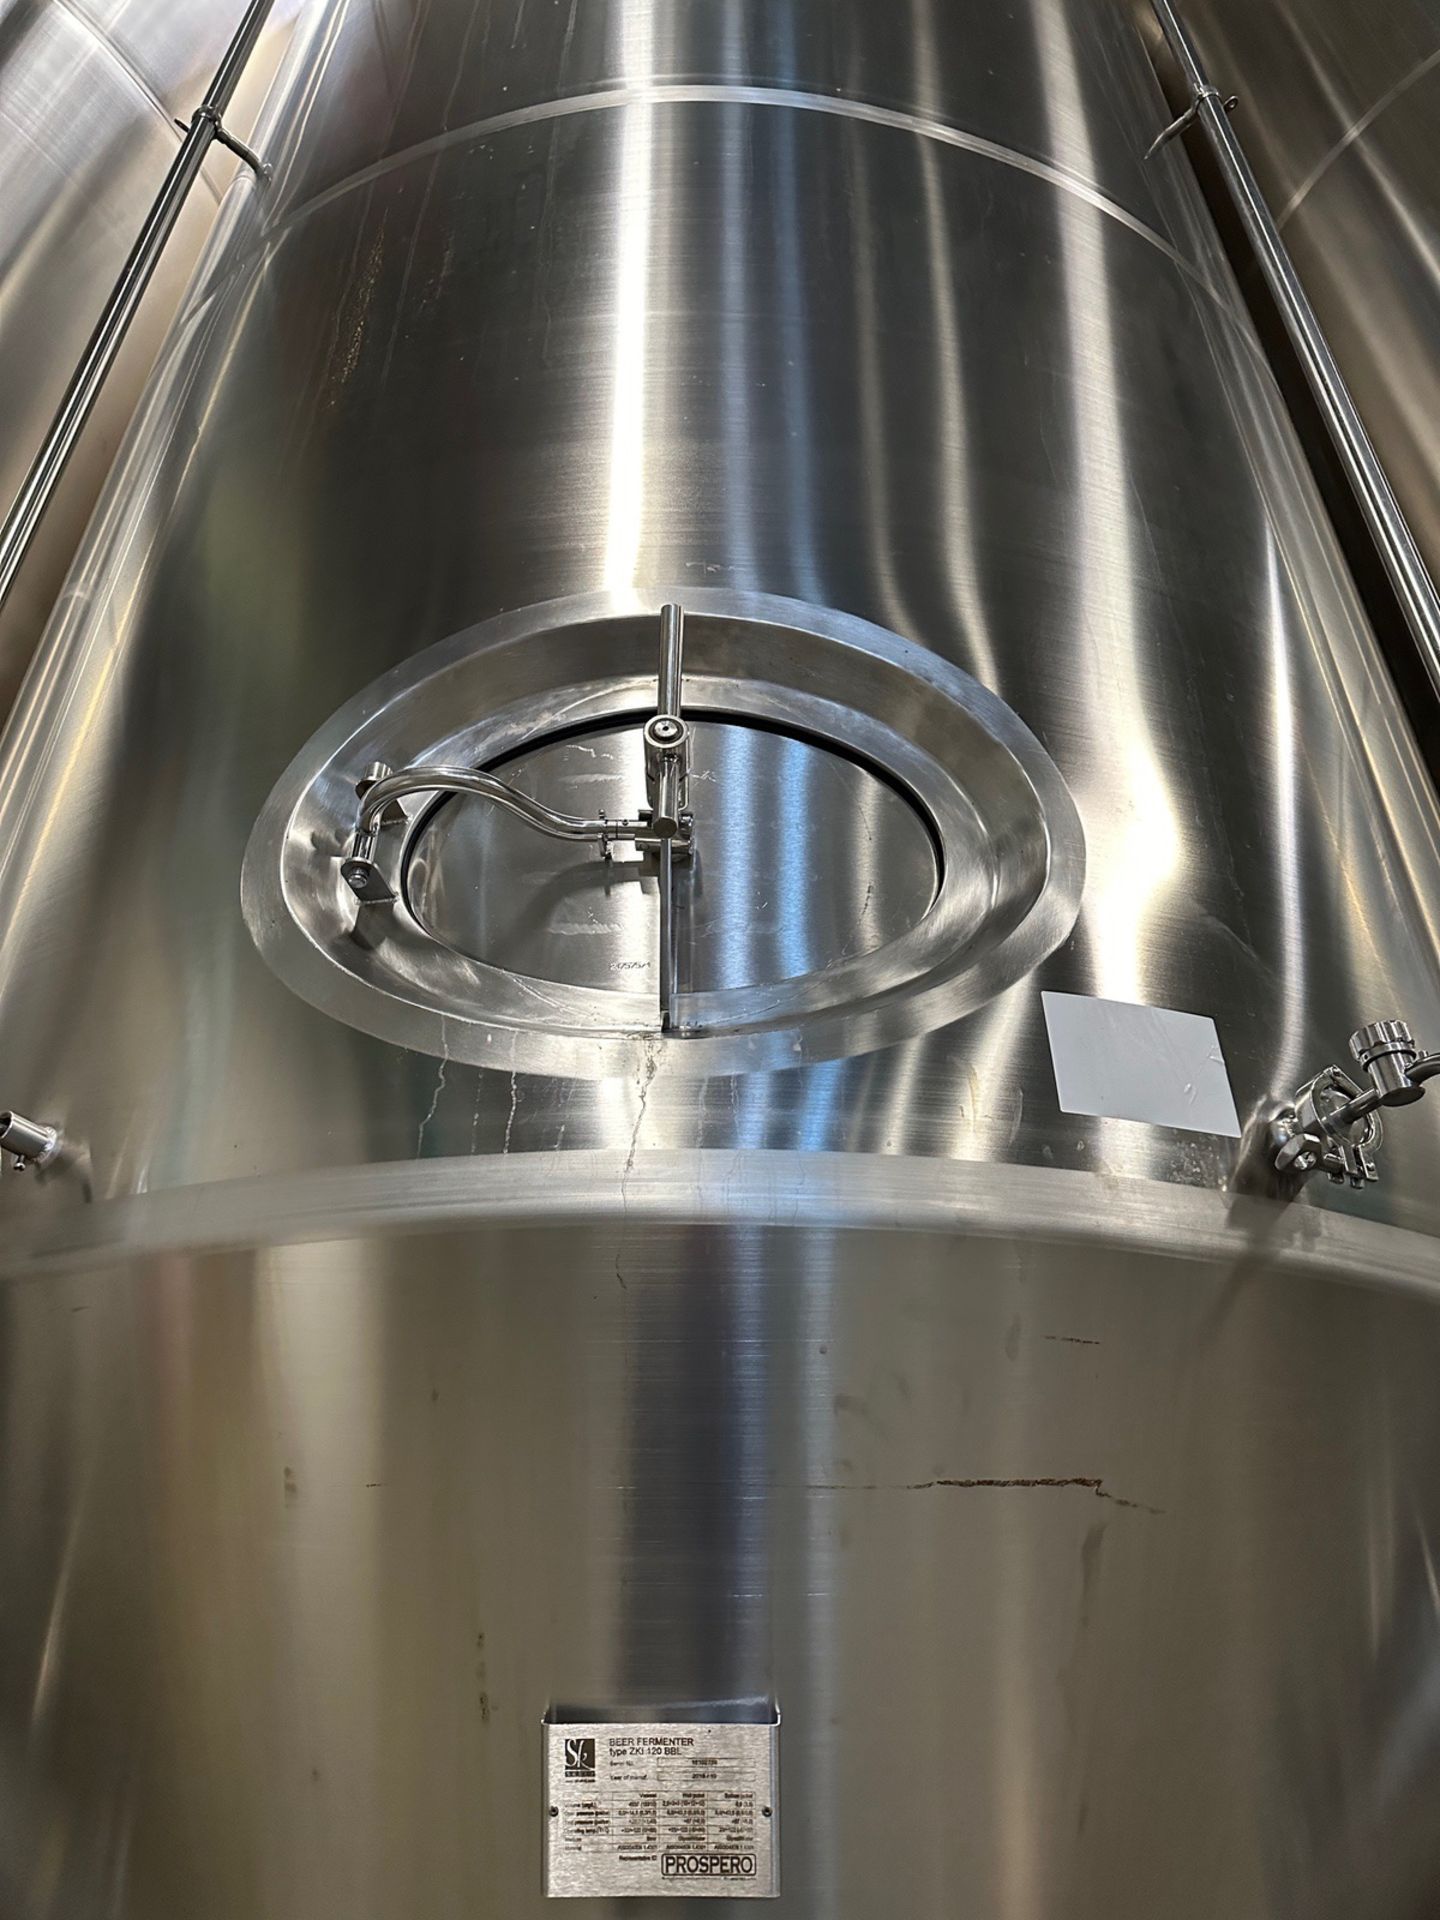 2018 Prospero SK 120 BBL Fermenter, Glycol Jacketed, Approx 7ft ID x 24ft OAH, S/N: 18102759 - Image 3 of 6